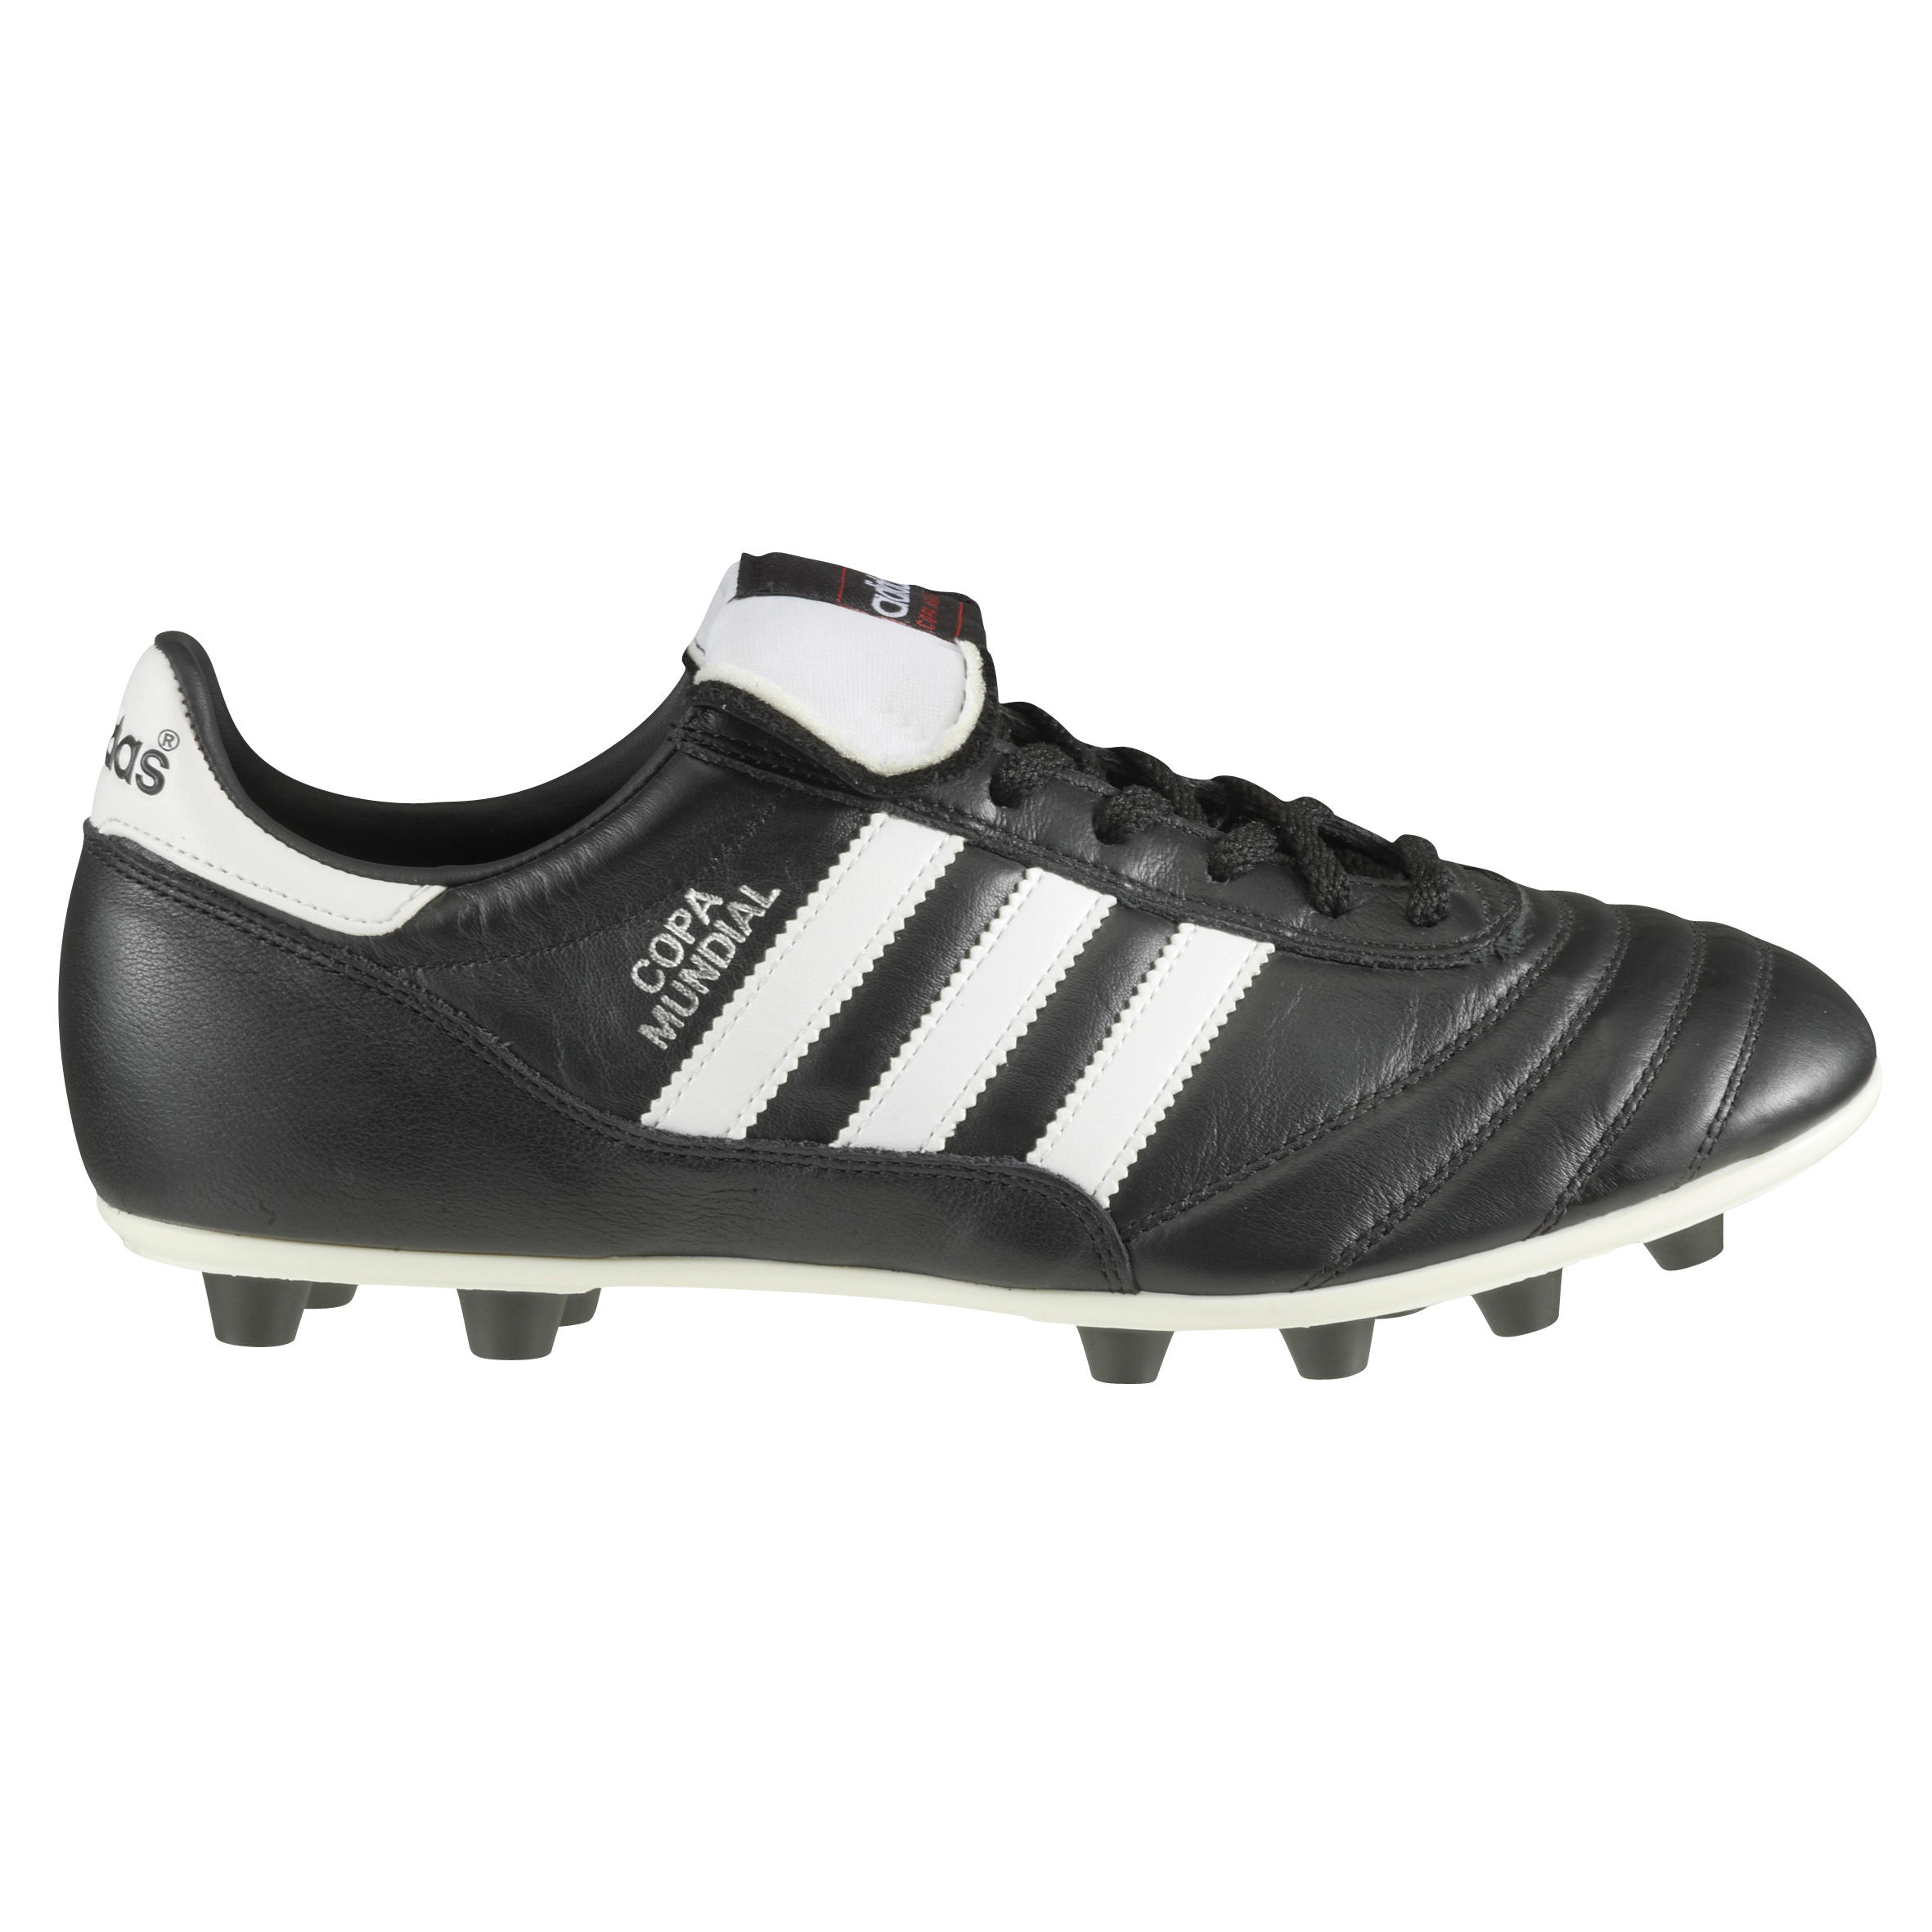 Adult Firm Ground Football Boots Copa Mundial FG